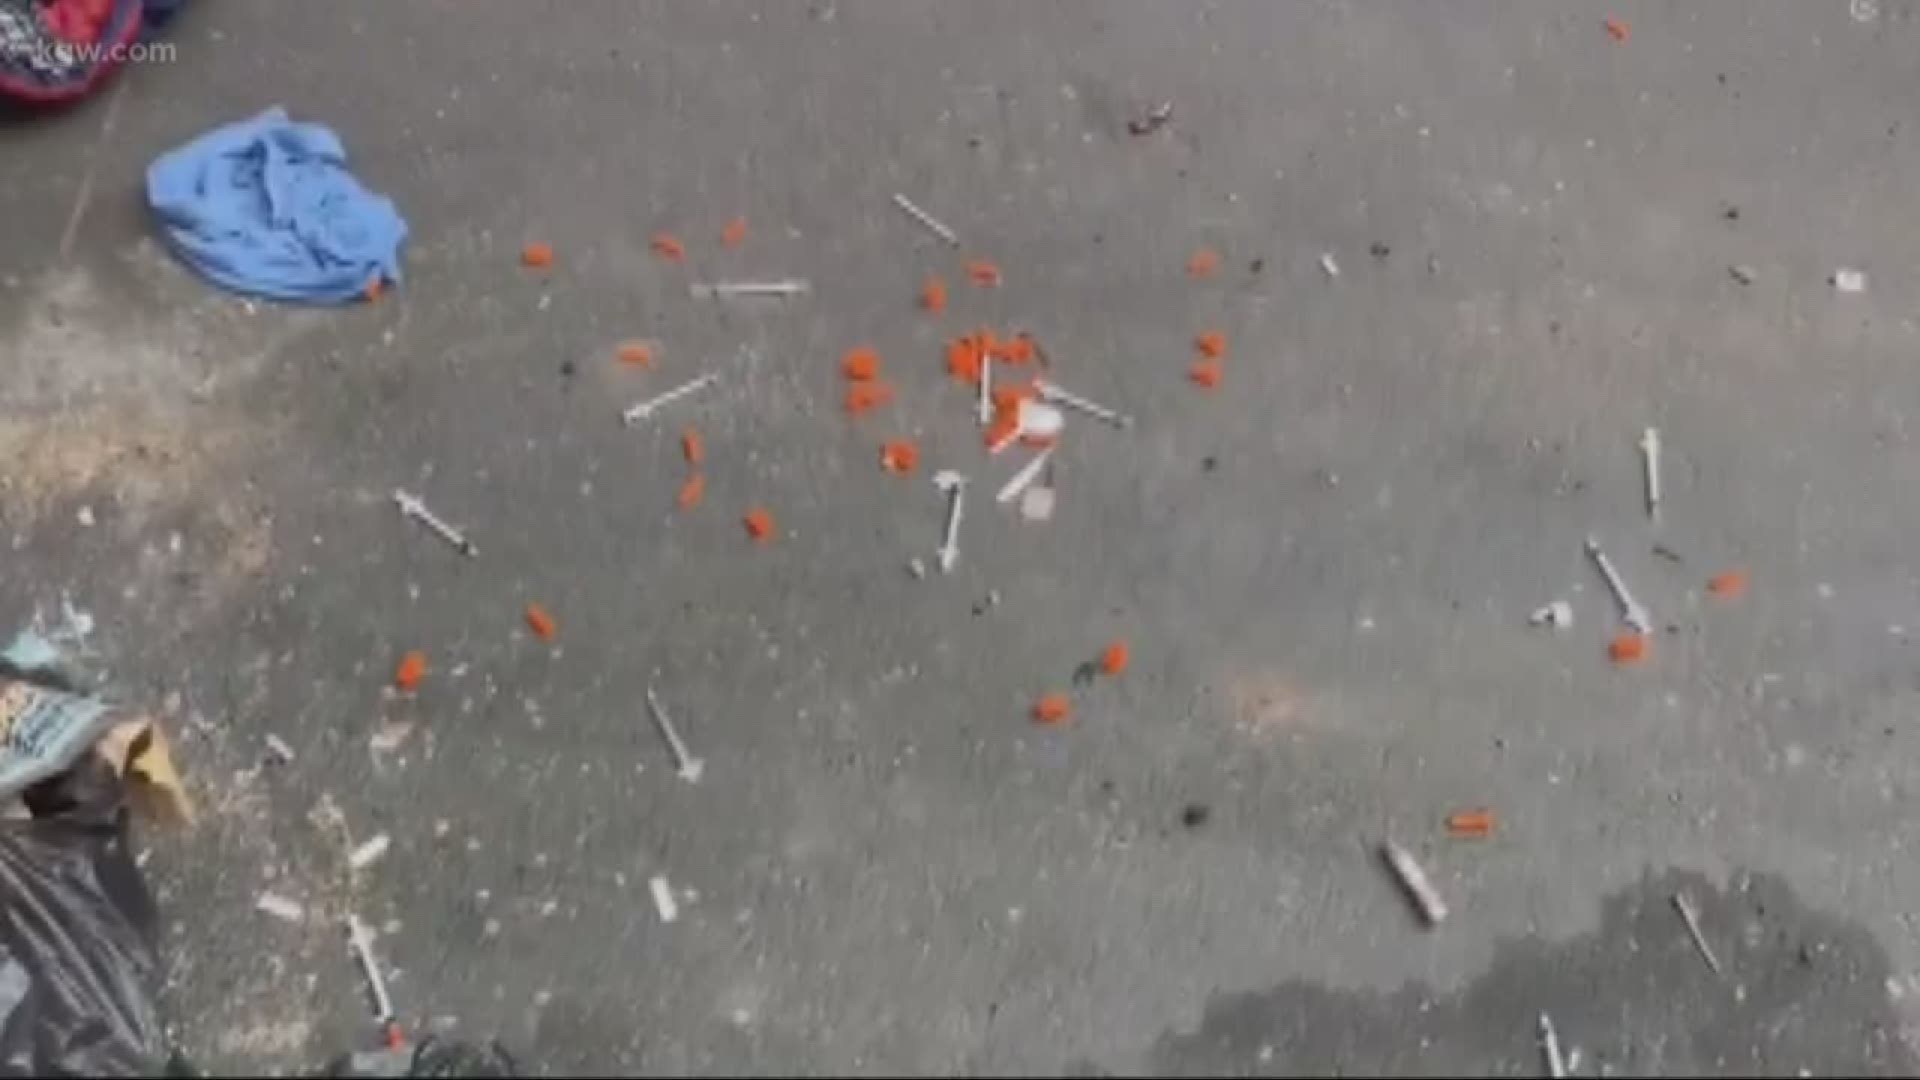 A Portland restaurant owner had to clean up a big mess after someone left dozens of hypodermic needles on his property, last weekend.